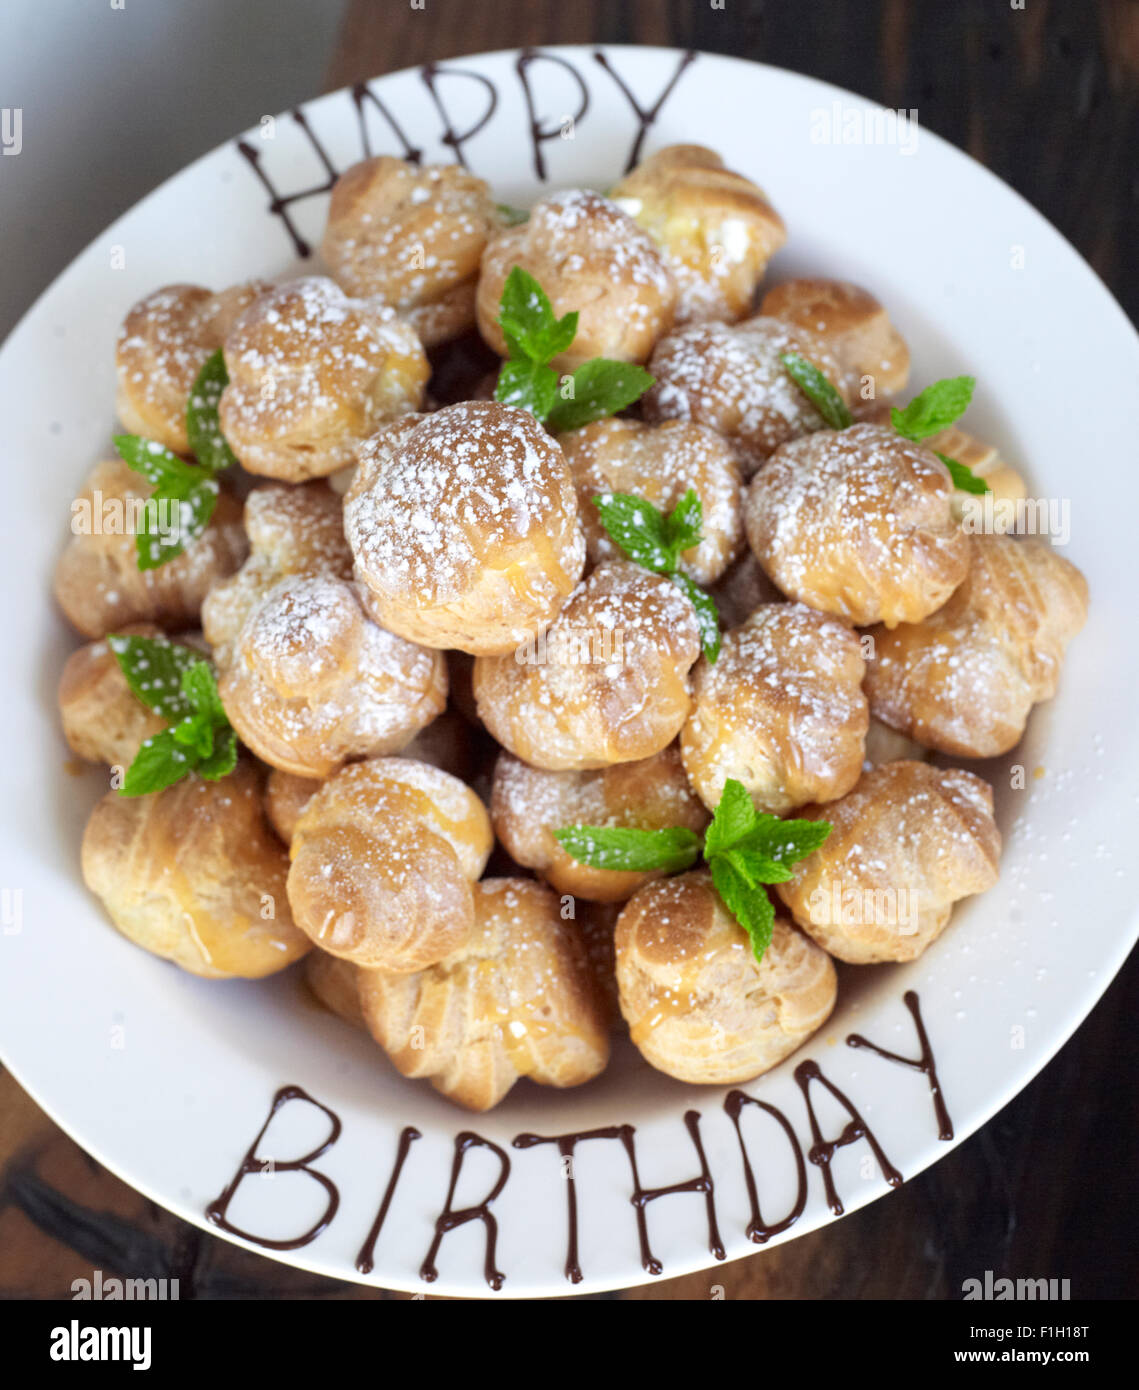 A small profiterole tower, placed in a white bowl with 'Happy Birthday' written onto it in sauce. Stock Photo